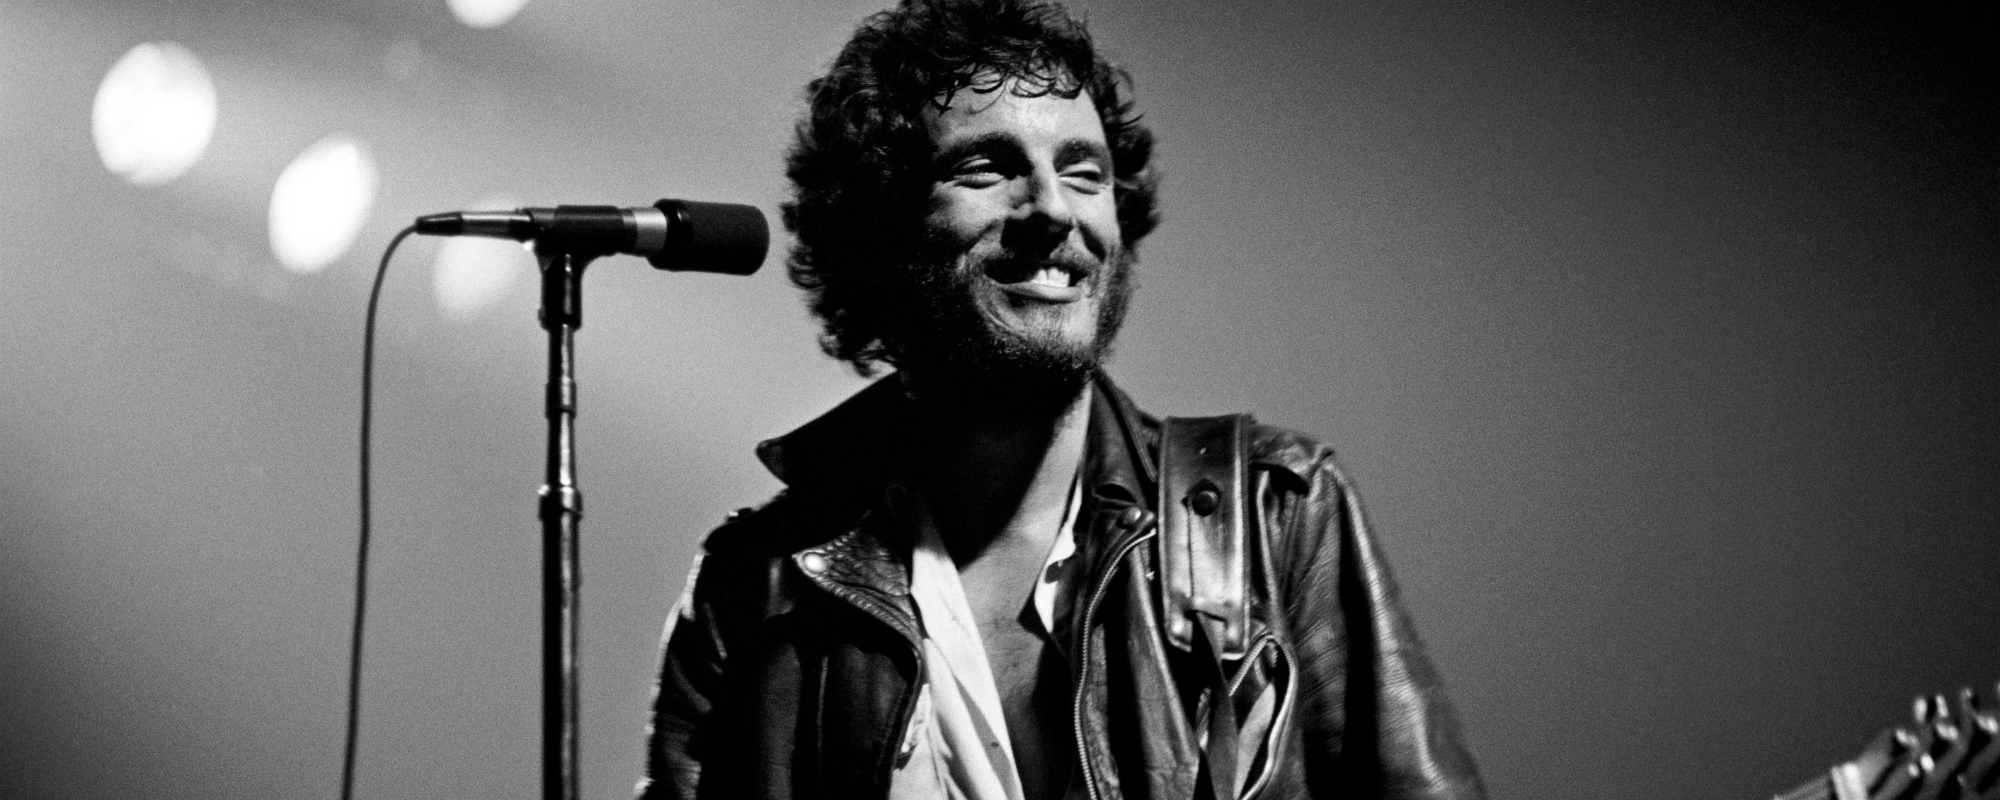 Bruce Springsteen Biopic Rumored to Star ‘The Bear’ Actor